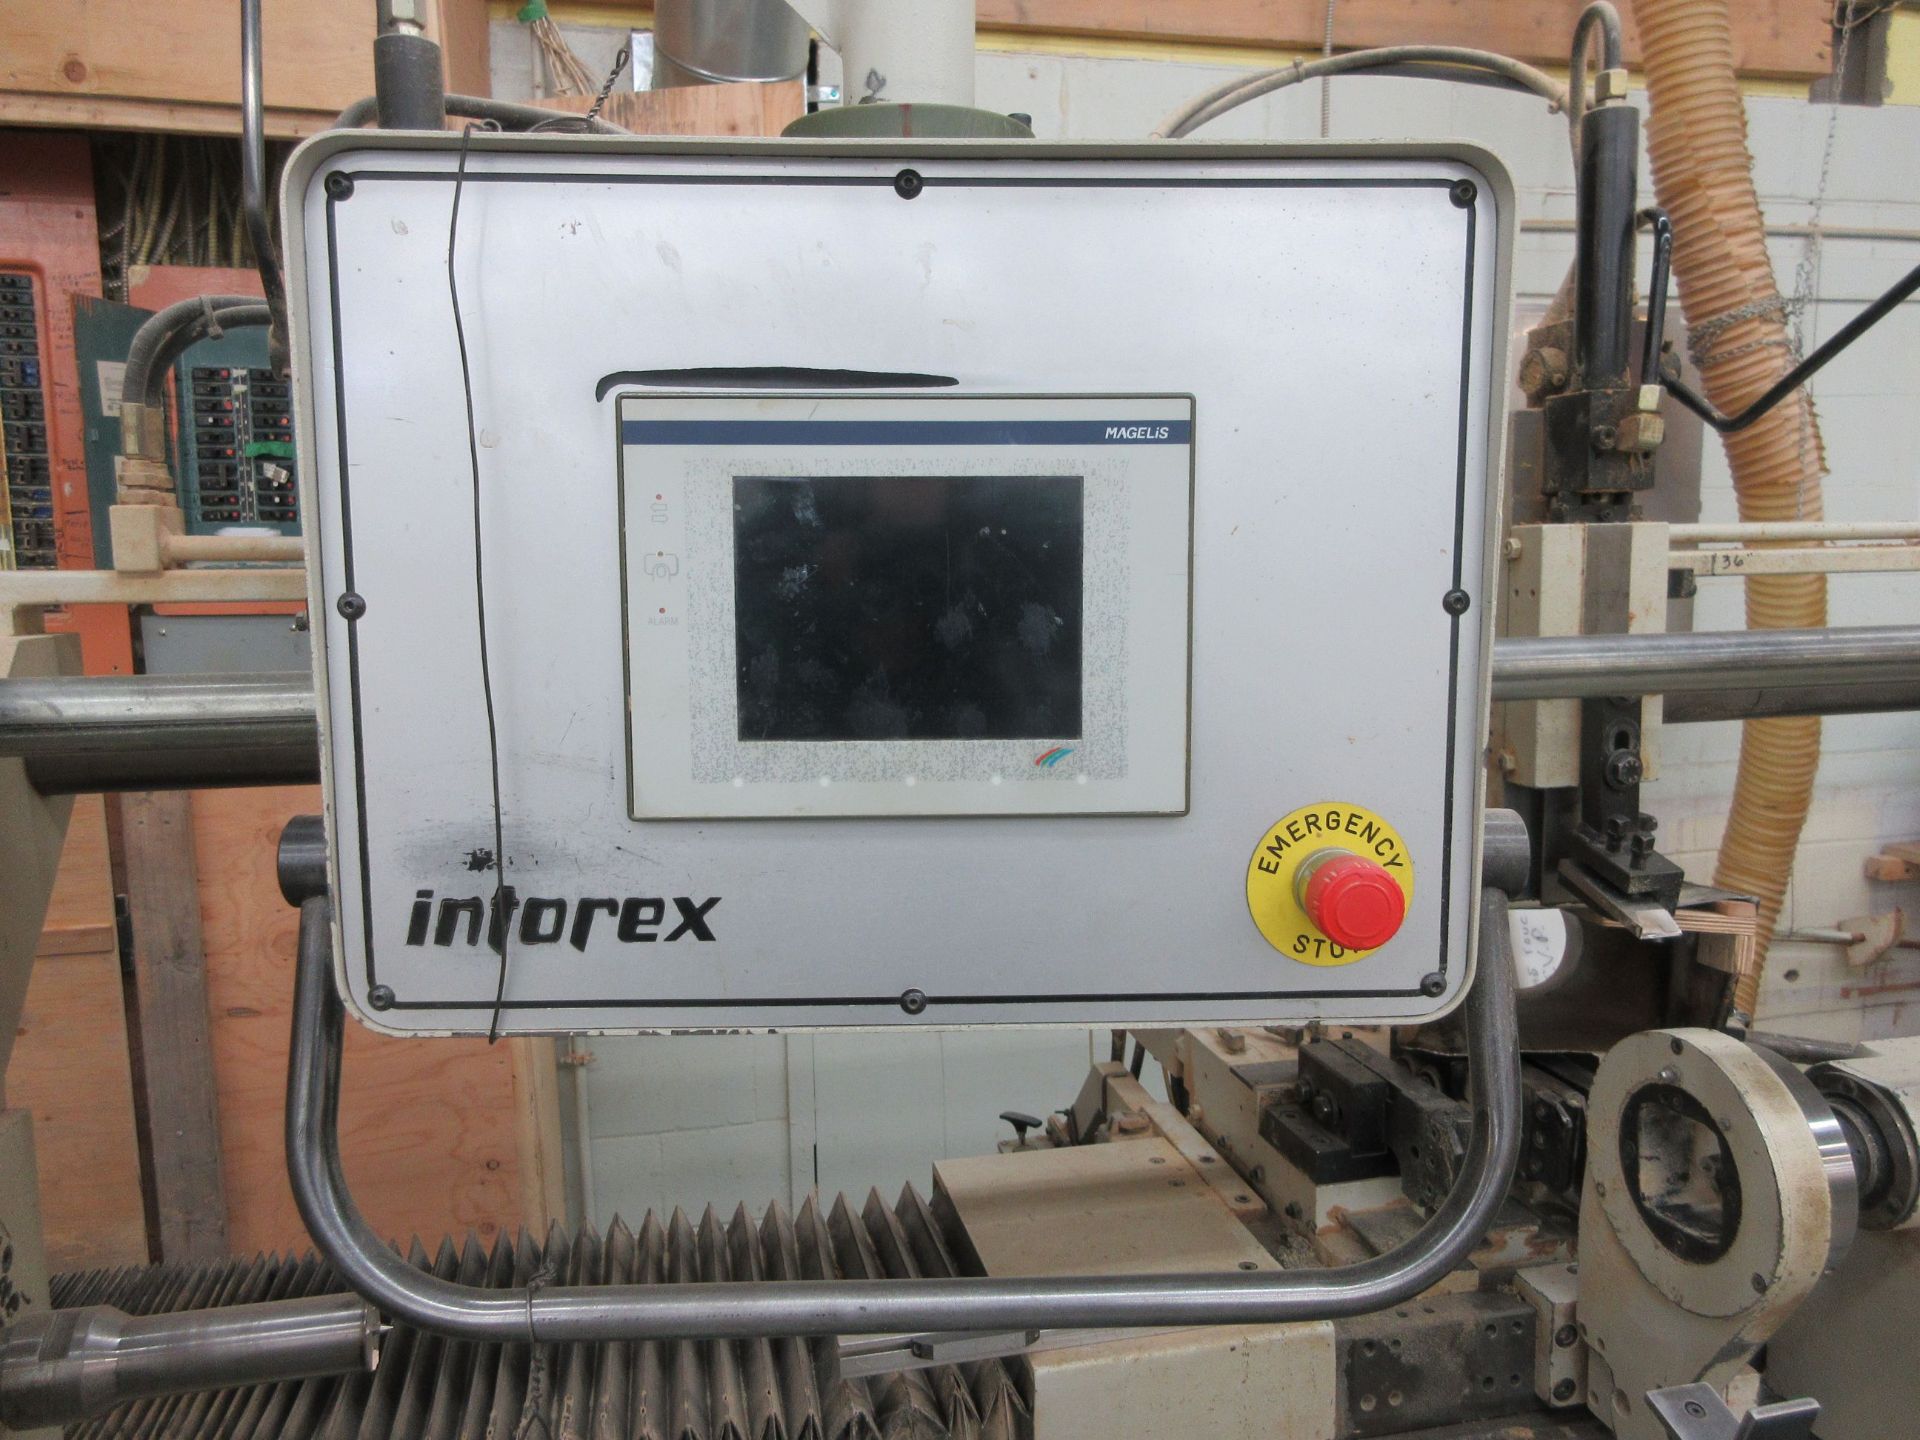 INTOREX AutD3:D310+D3:D19omatic lather Mod: CI-300, 10ft,600 volts, year: 2002 - Image 2 of 12